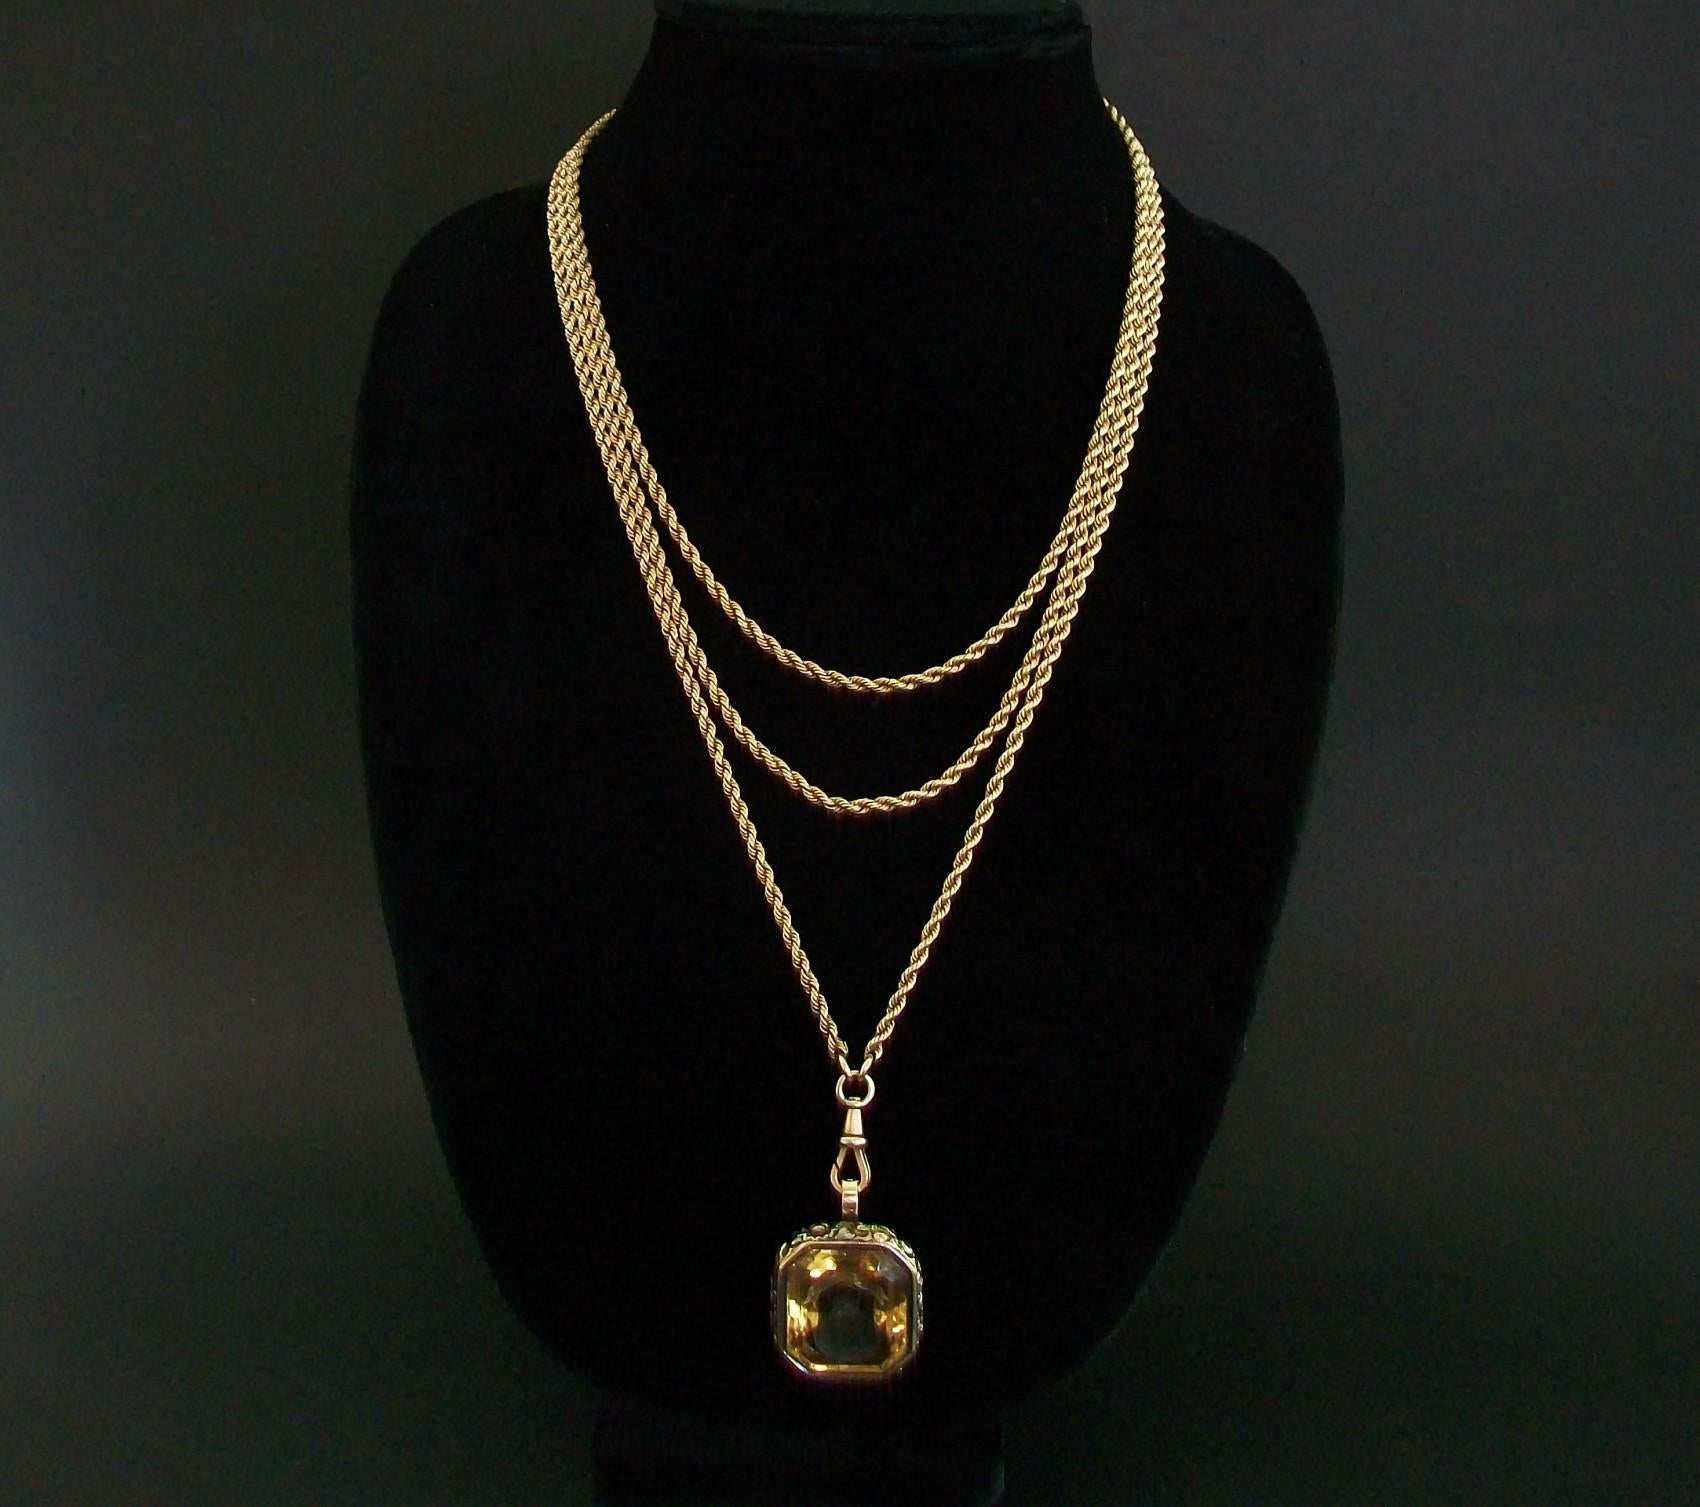 Emerald Cut Georgian Carved Citrine Fob & Rope Twist Watch Chain/Necklace - 19th Century For Sale